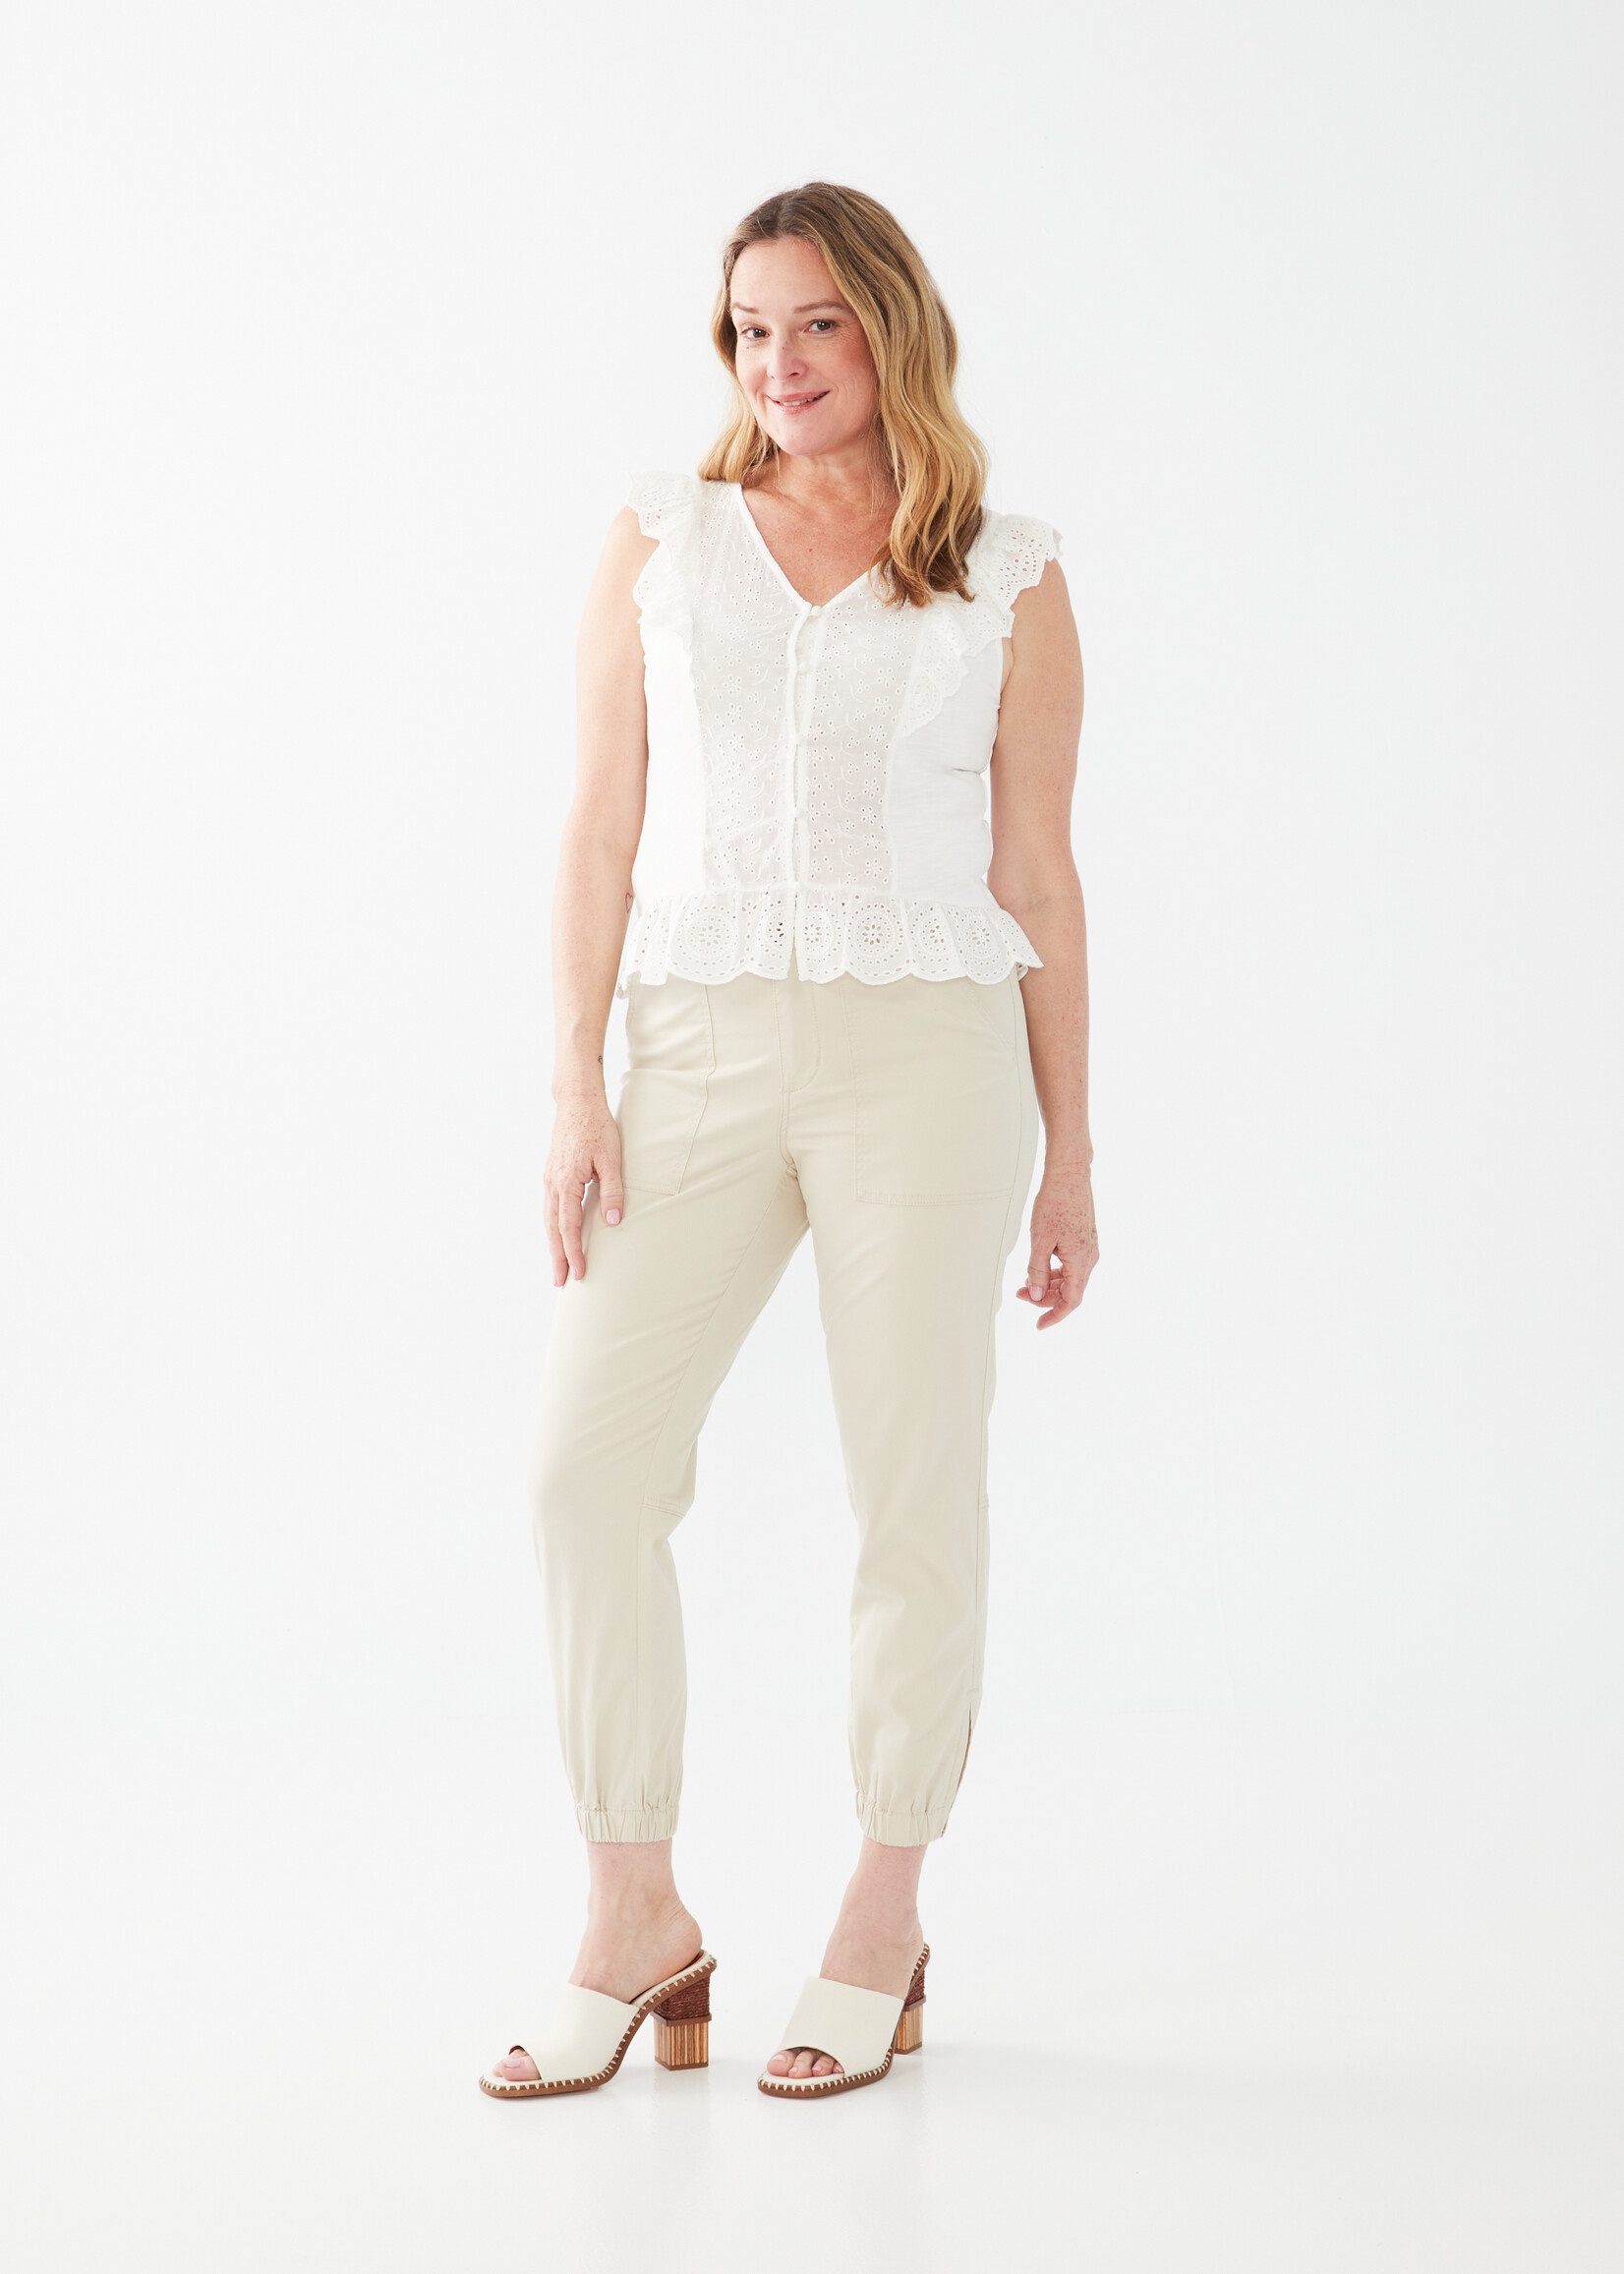 French Dressing Jeans FDJ Cuffed Hem Front Pocket Detail Pant